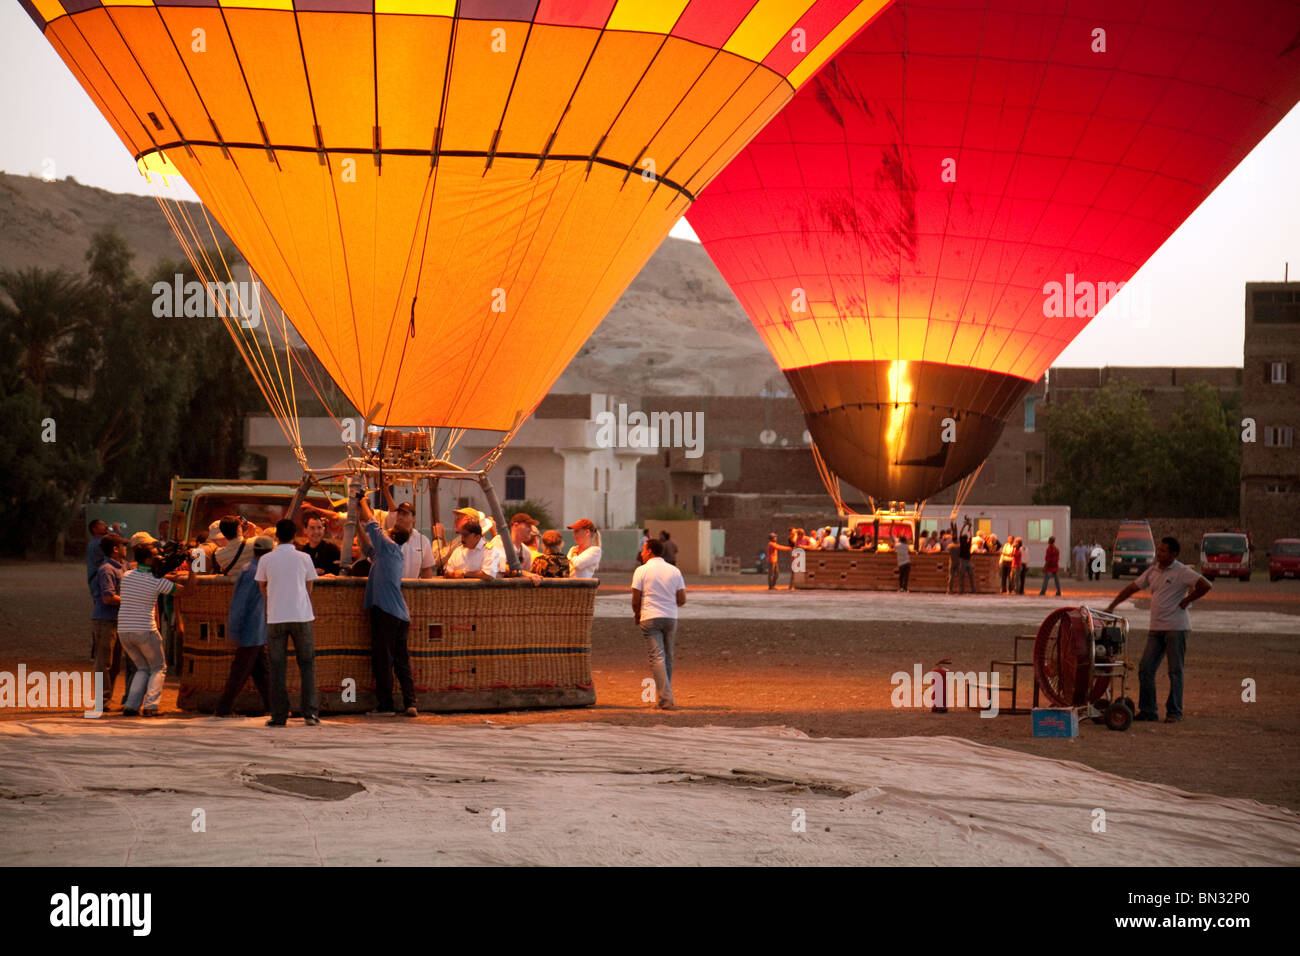 Two hot air balloons preparing to lift off at dawn, Luxor, Egypt, Africa, concept of Adventure travel Stock Photo